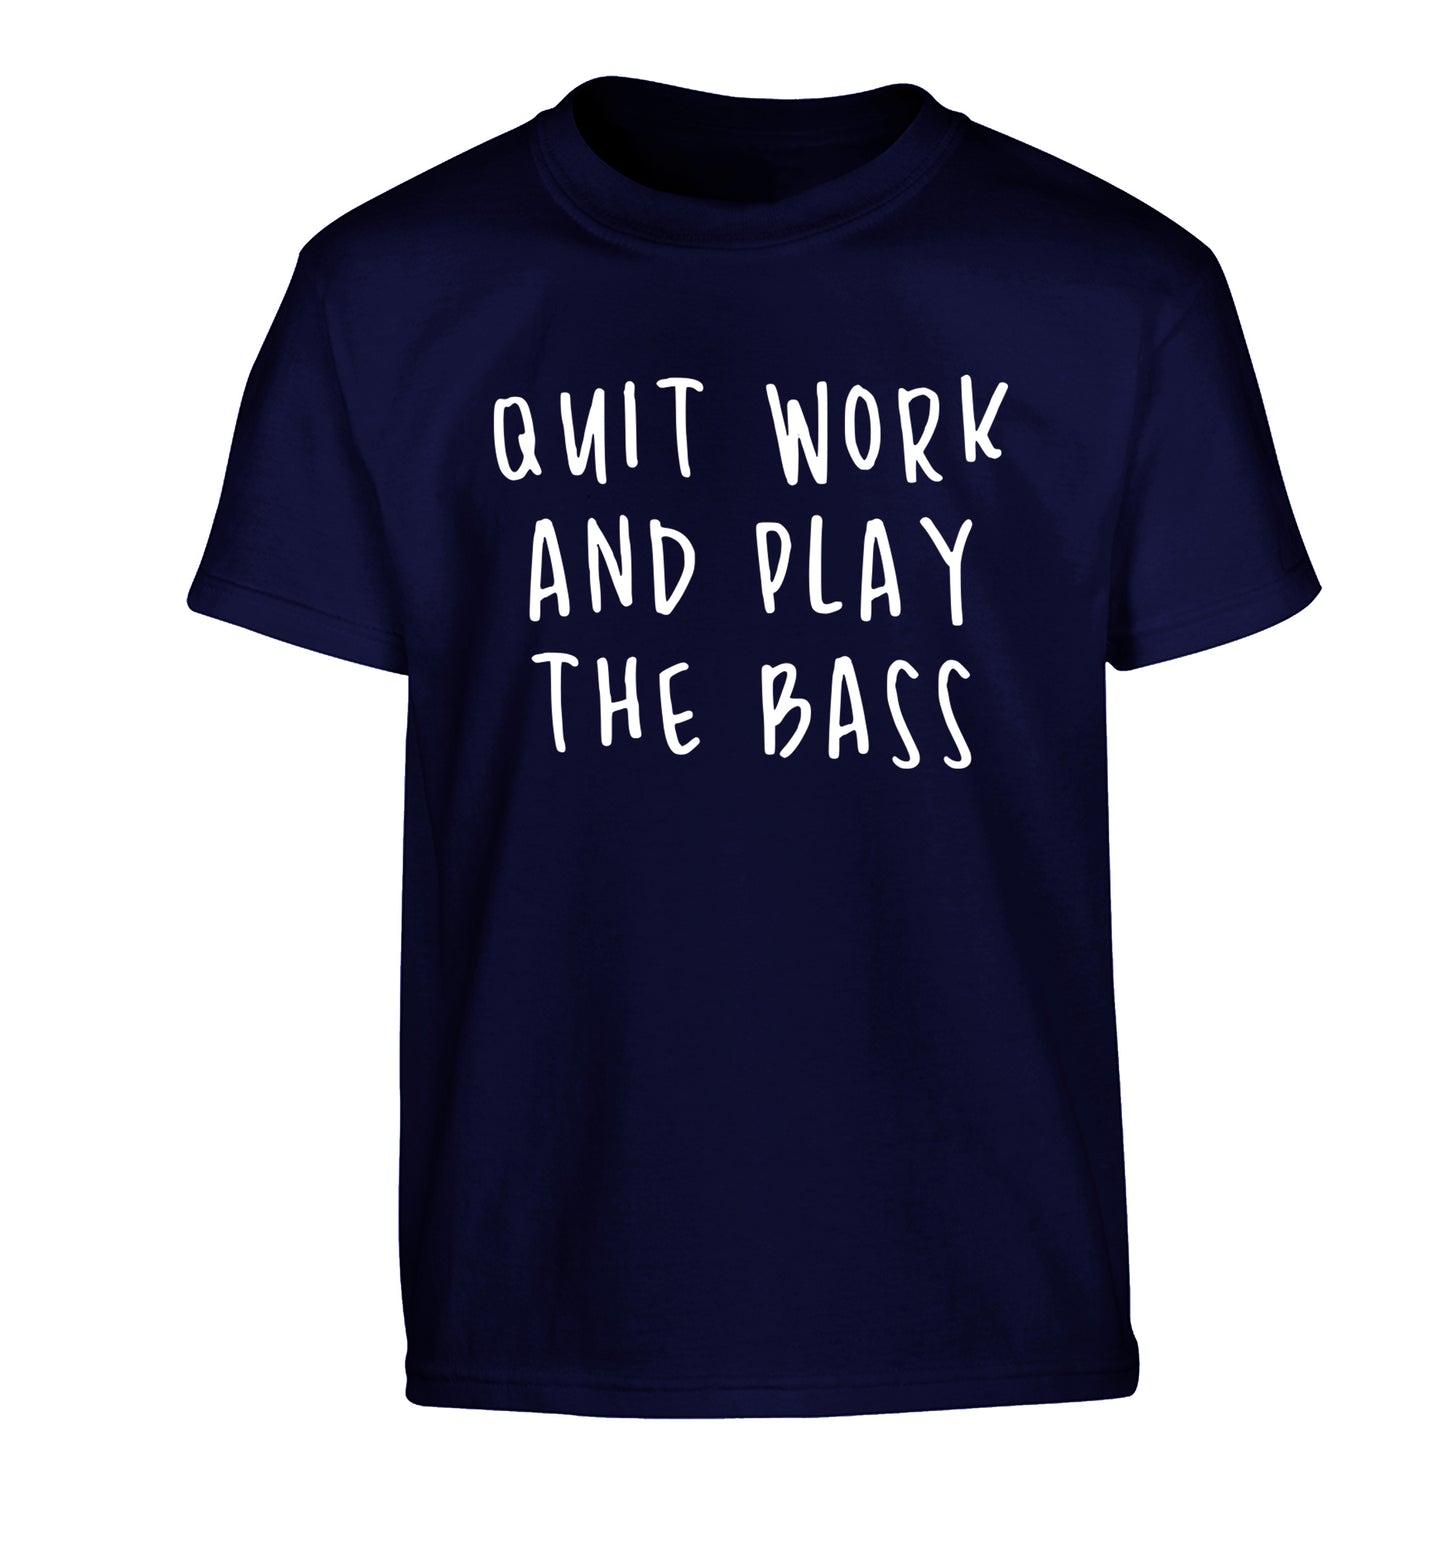 Quit work and play the bass Children's navy Tshirt 12-14 Years